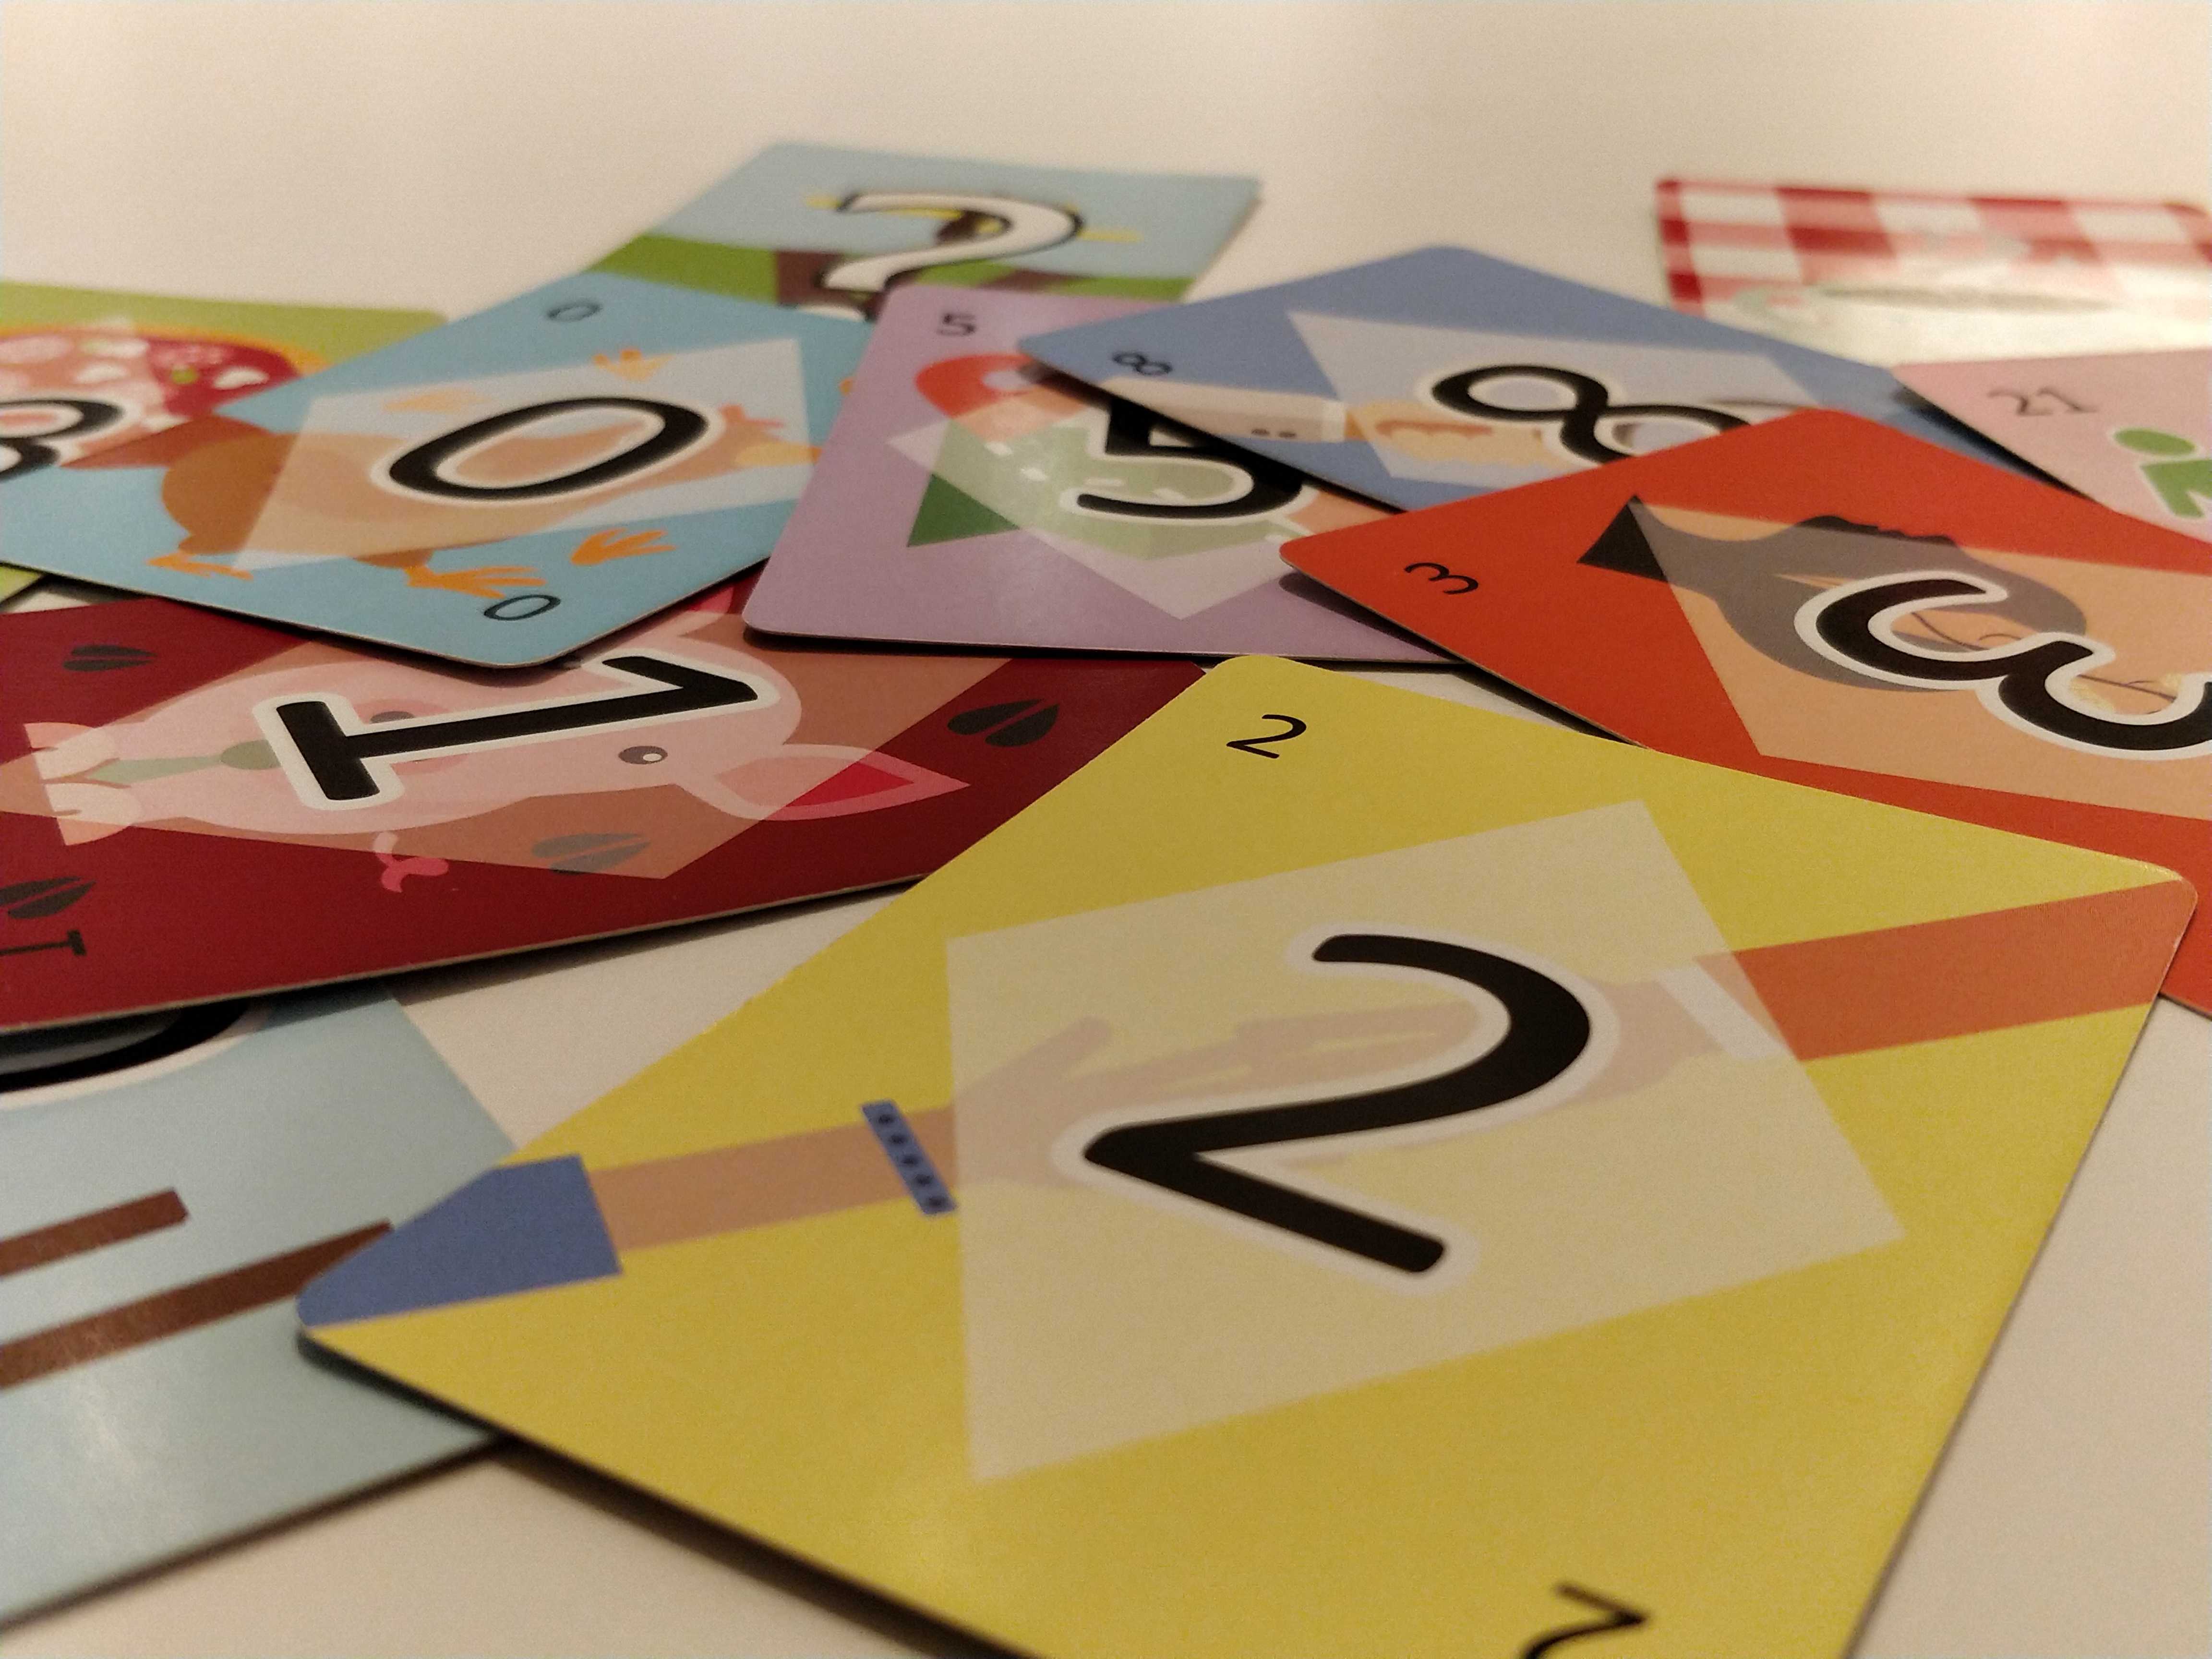 When we estimate in person, we use planning poker cards. Photo by Nick Budak.